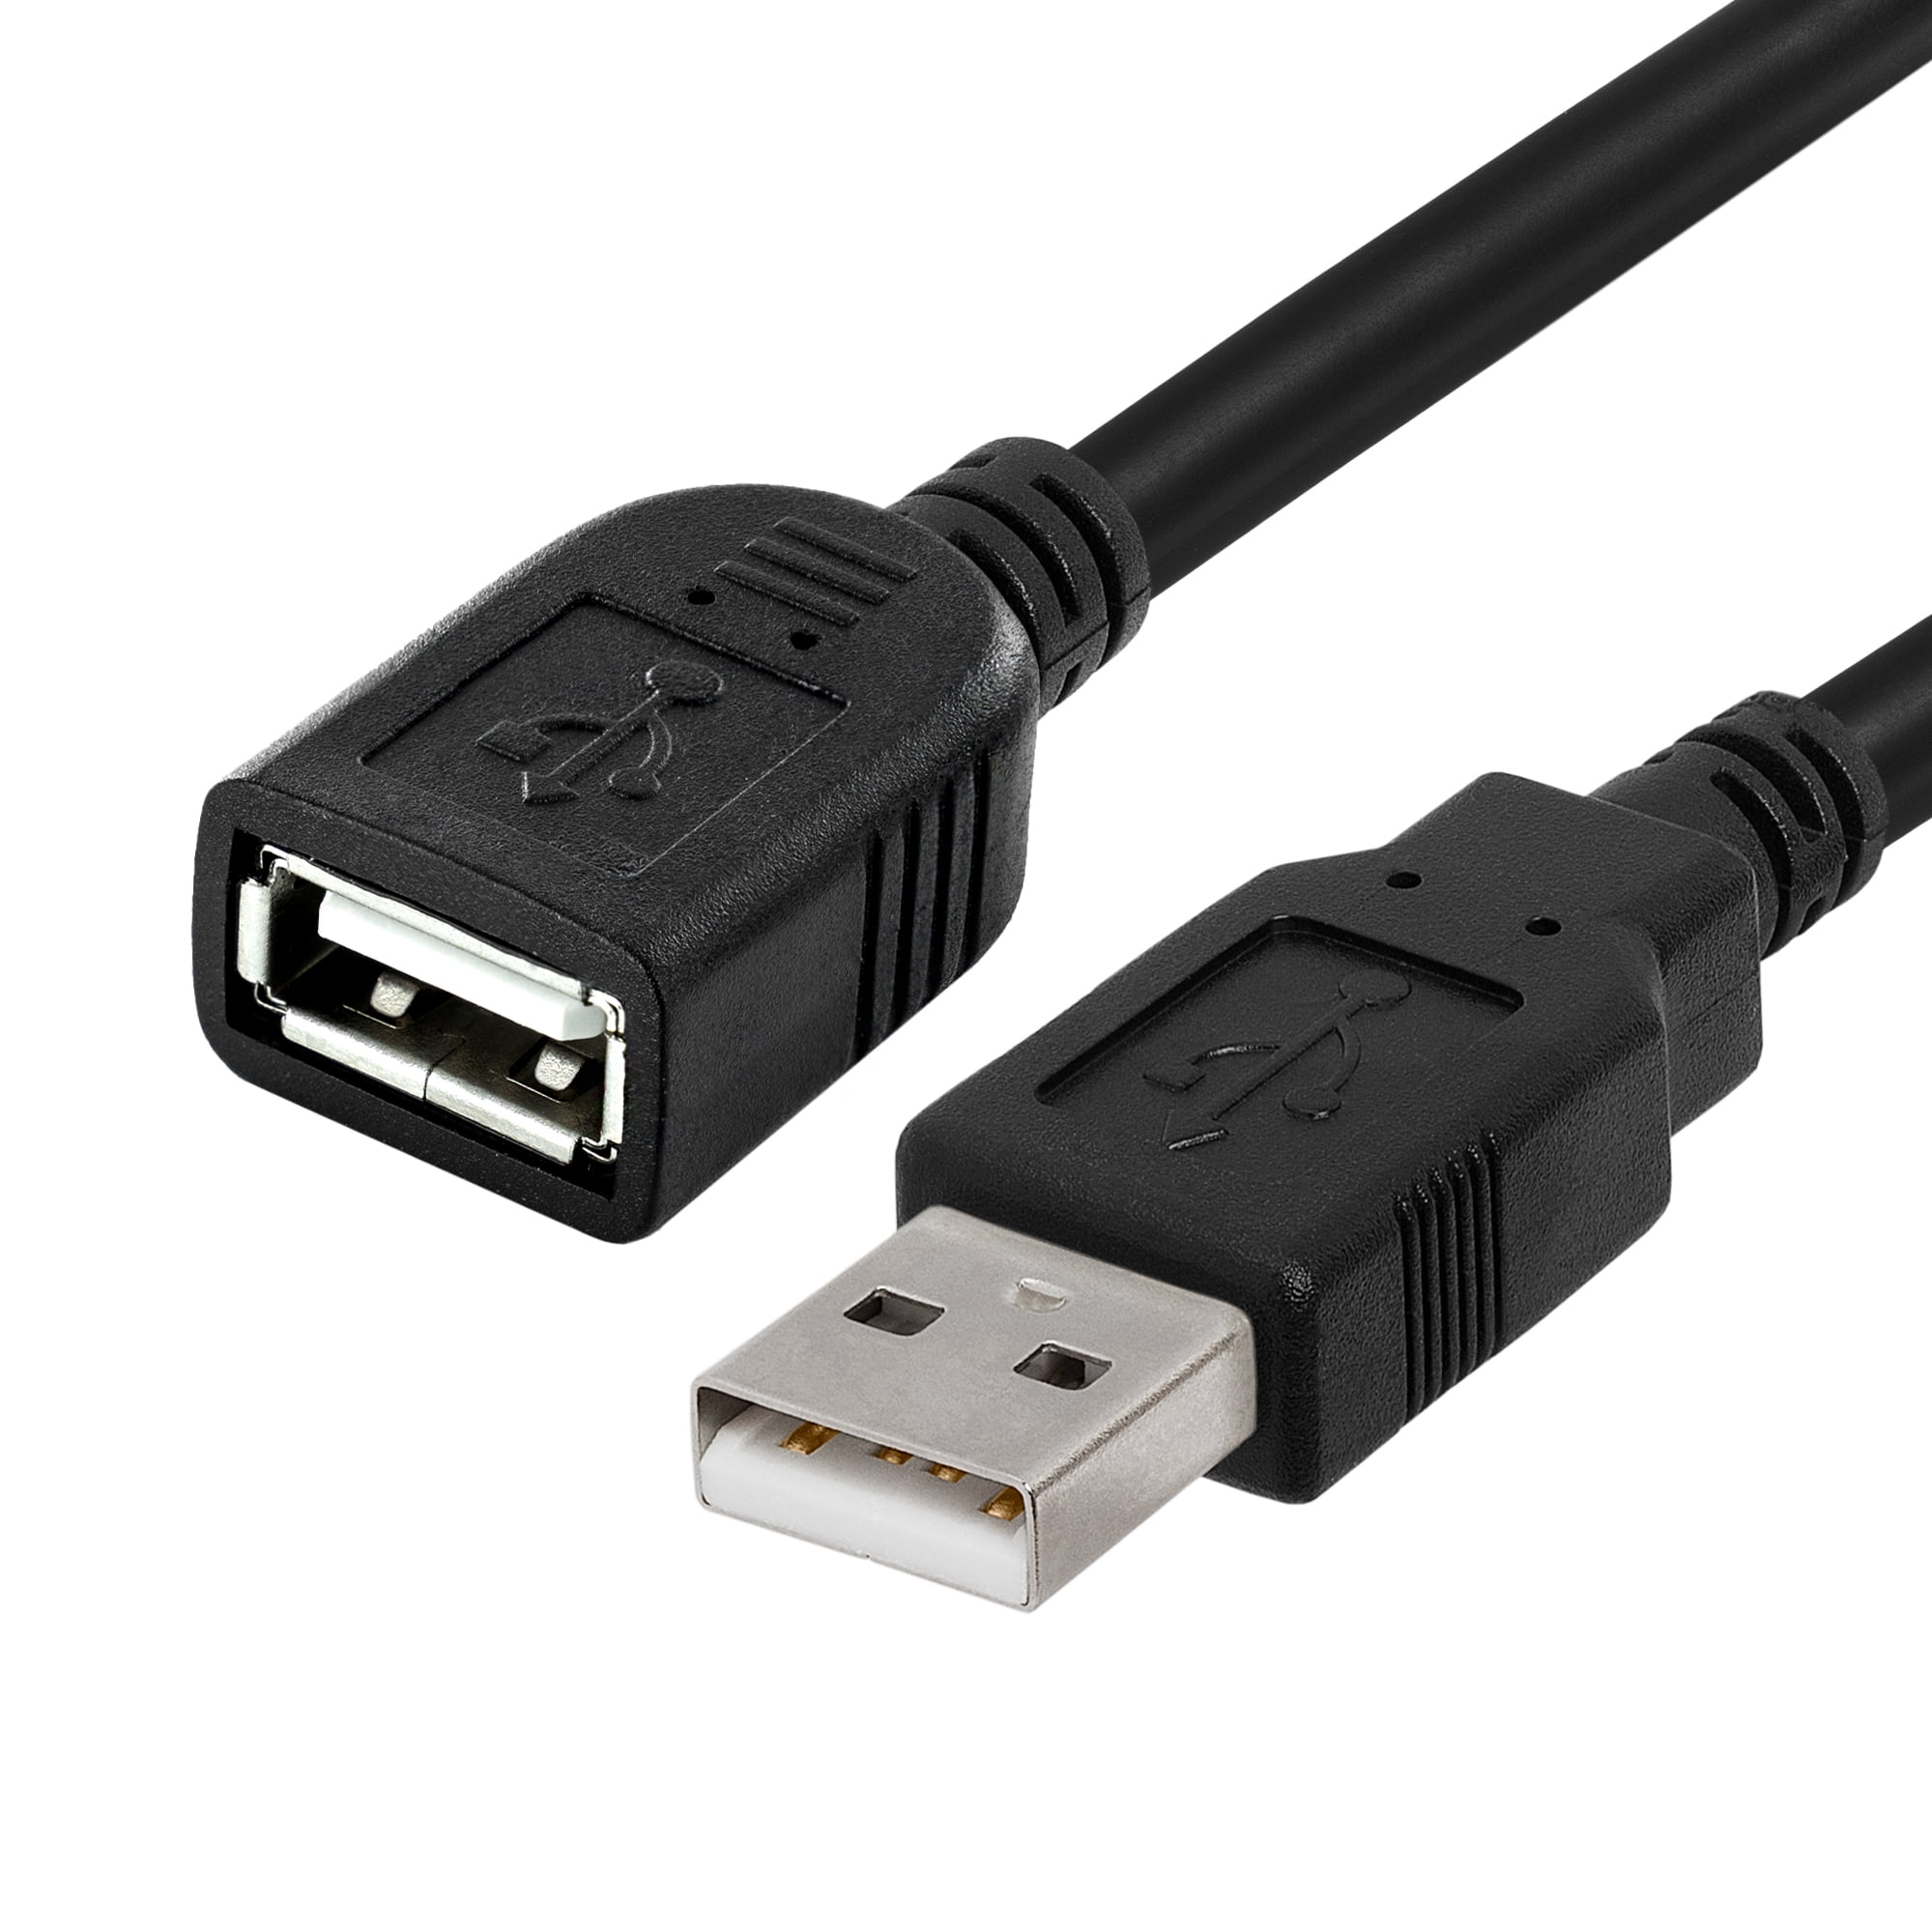 - Speed USB 2.0 Extension Cable - Flexible USB Extender - A Male to A Female Adapter - 10FT Black - Walmart.com